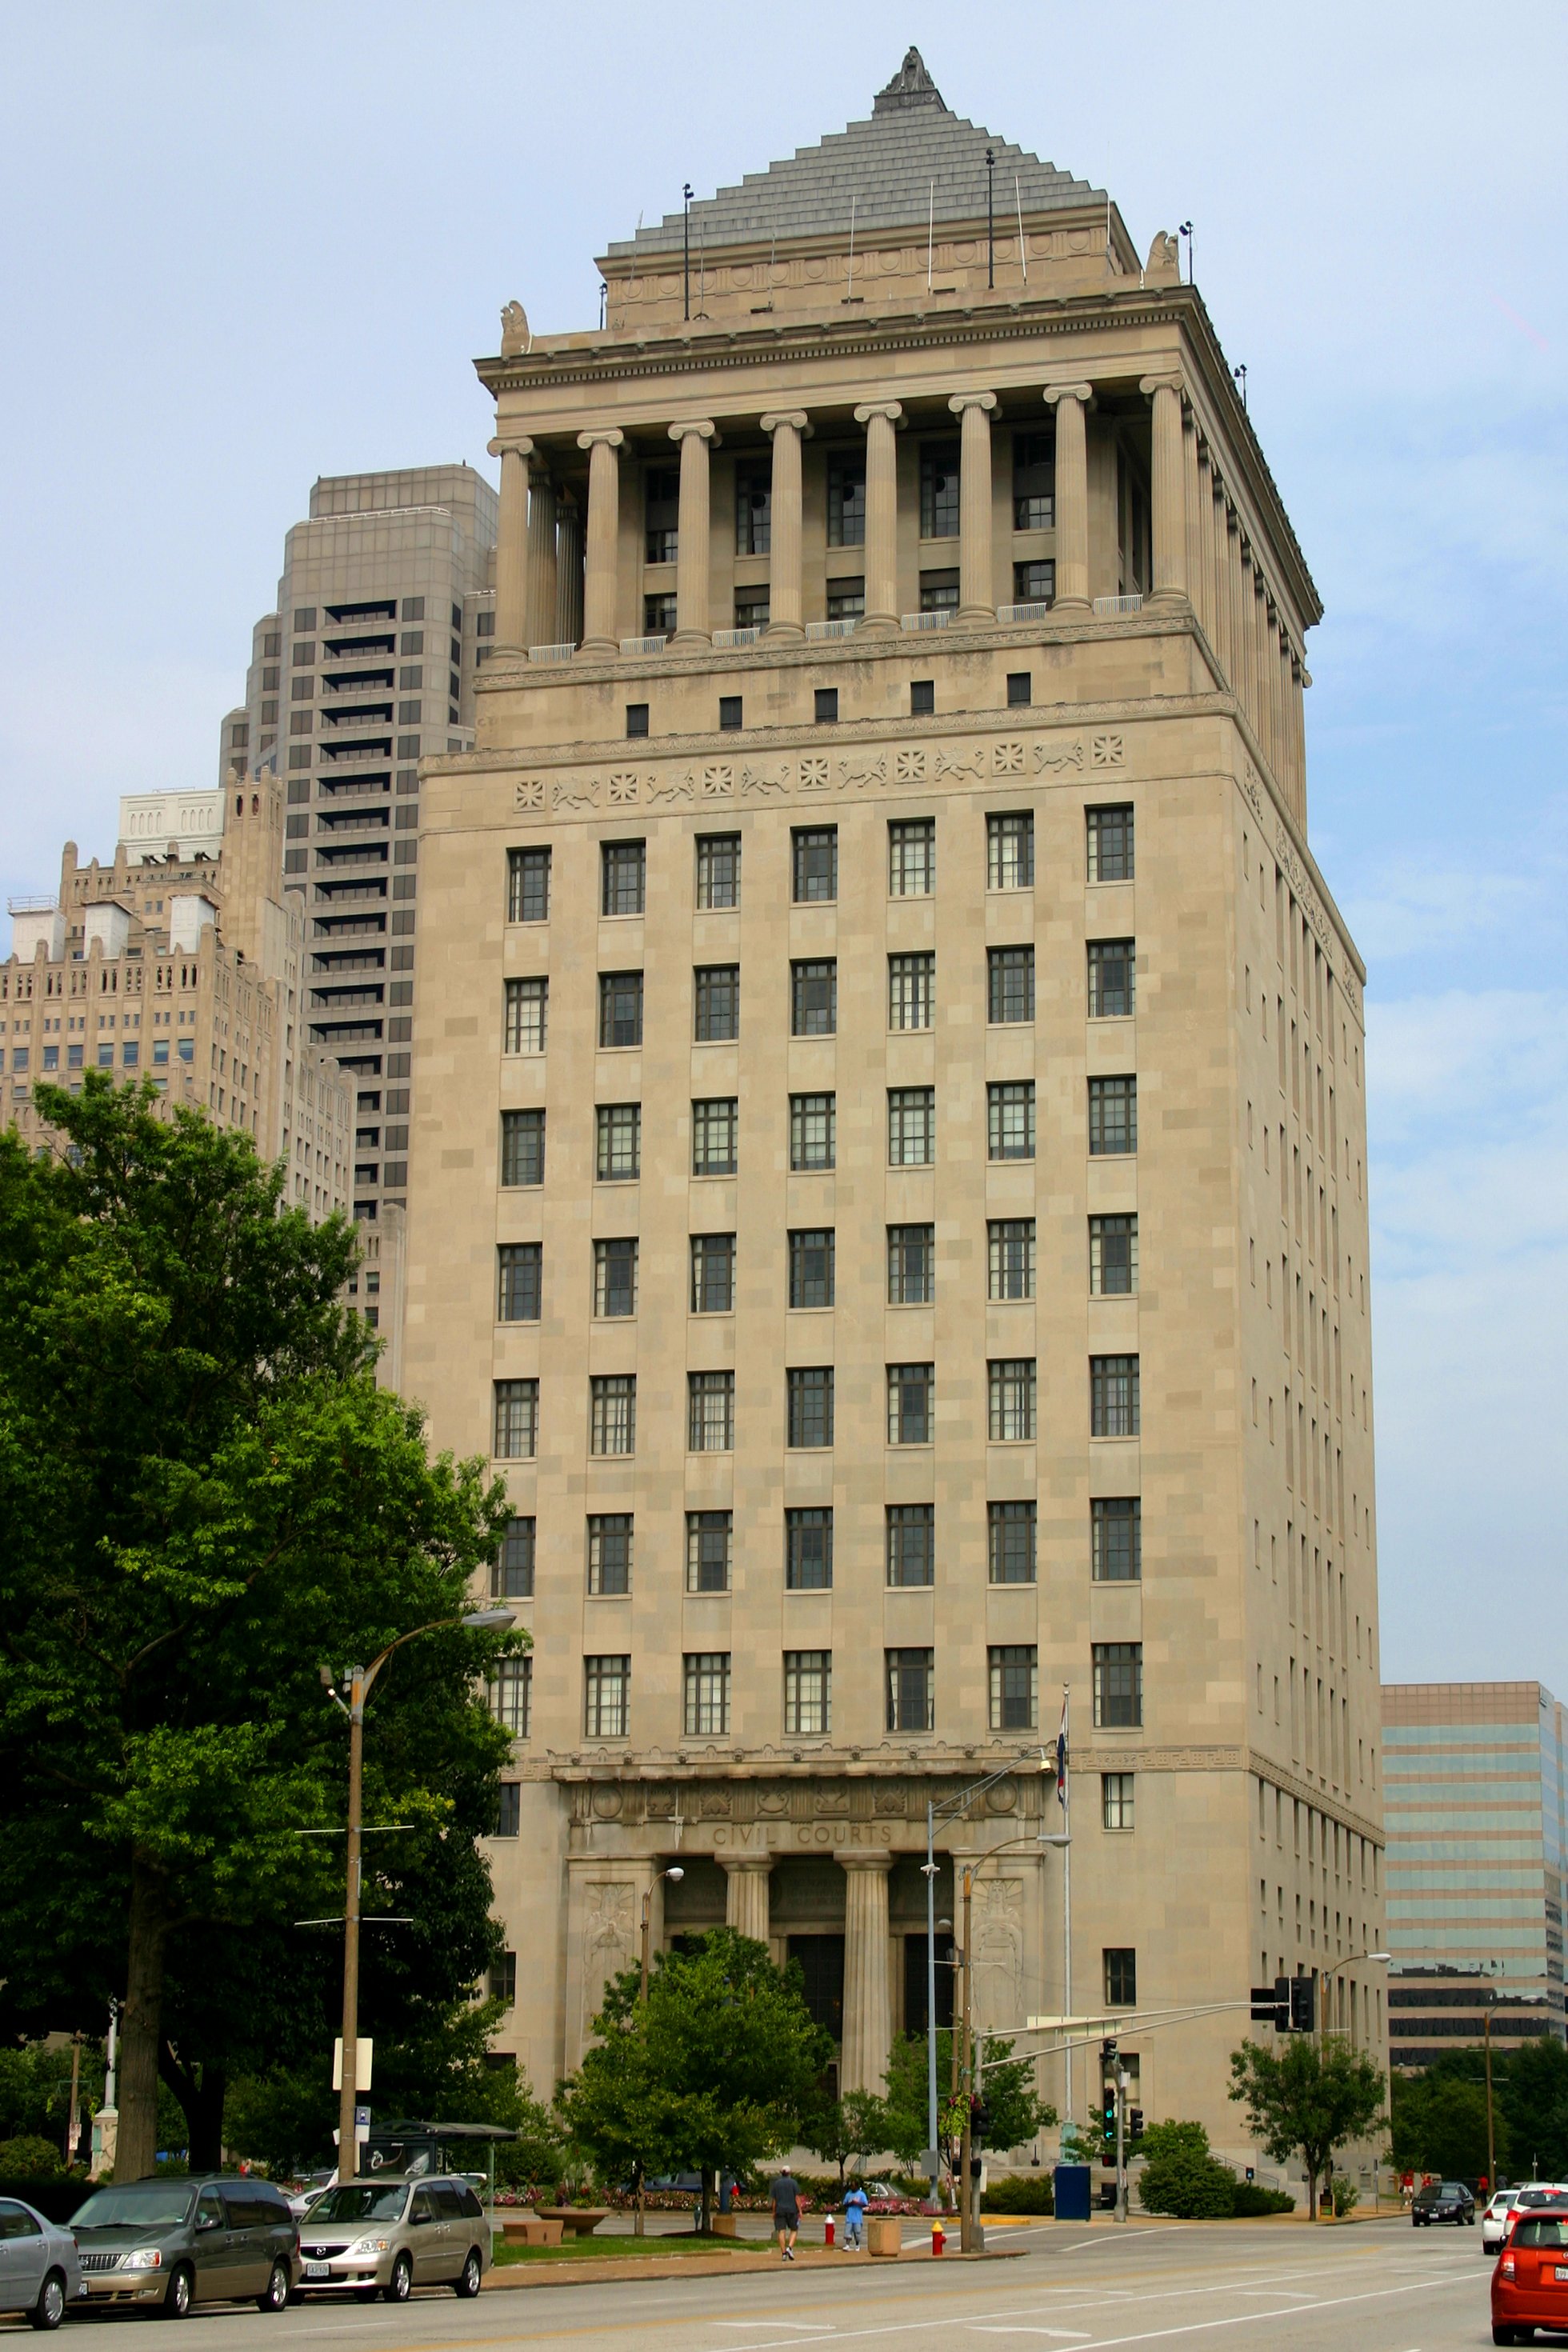 File:2010-07-04 1960x2940 stlouis civil courts 0 - Wikimedia Commons